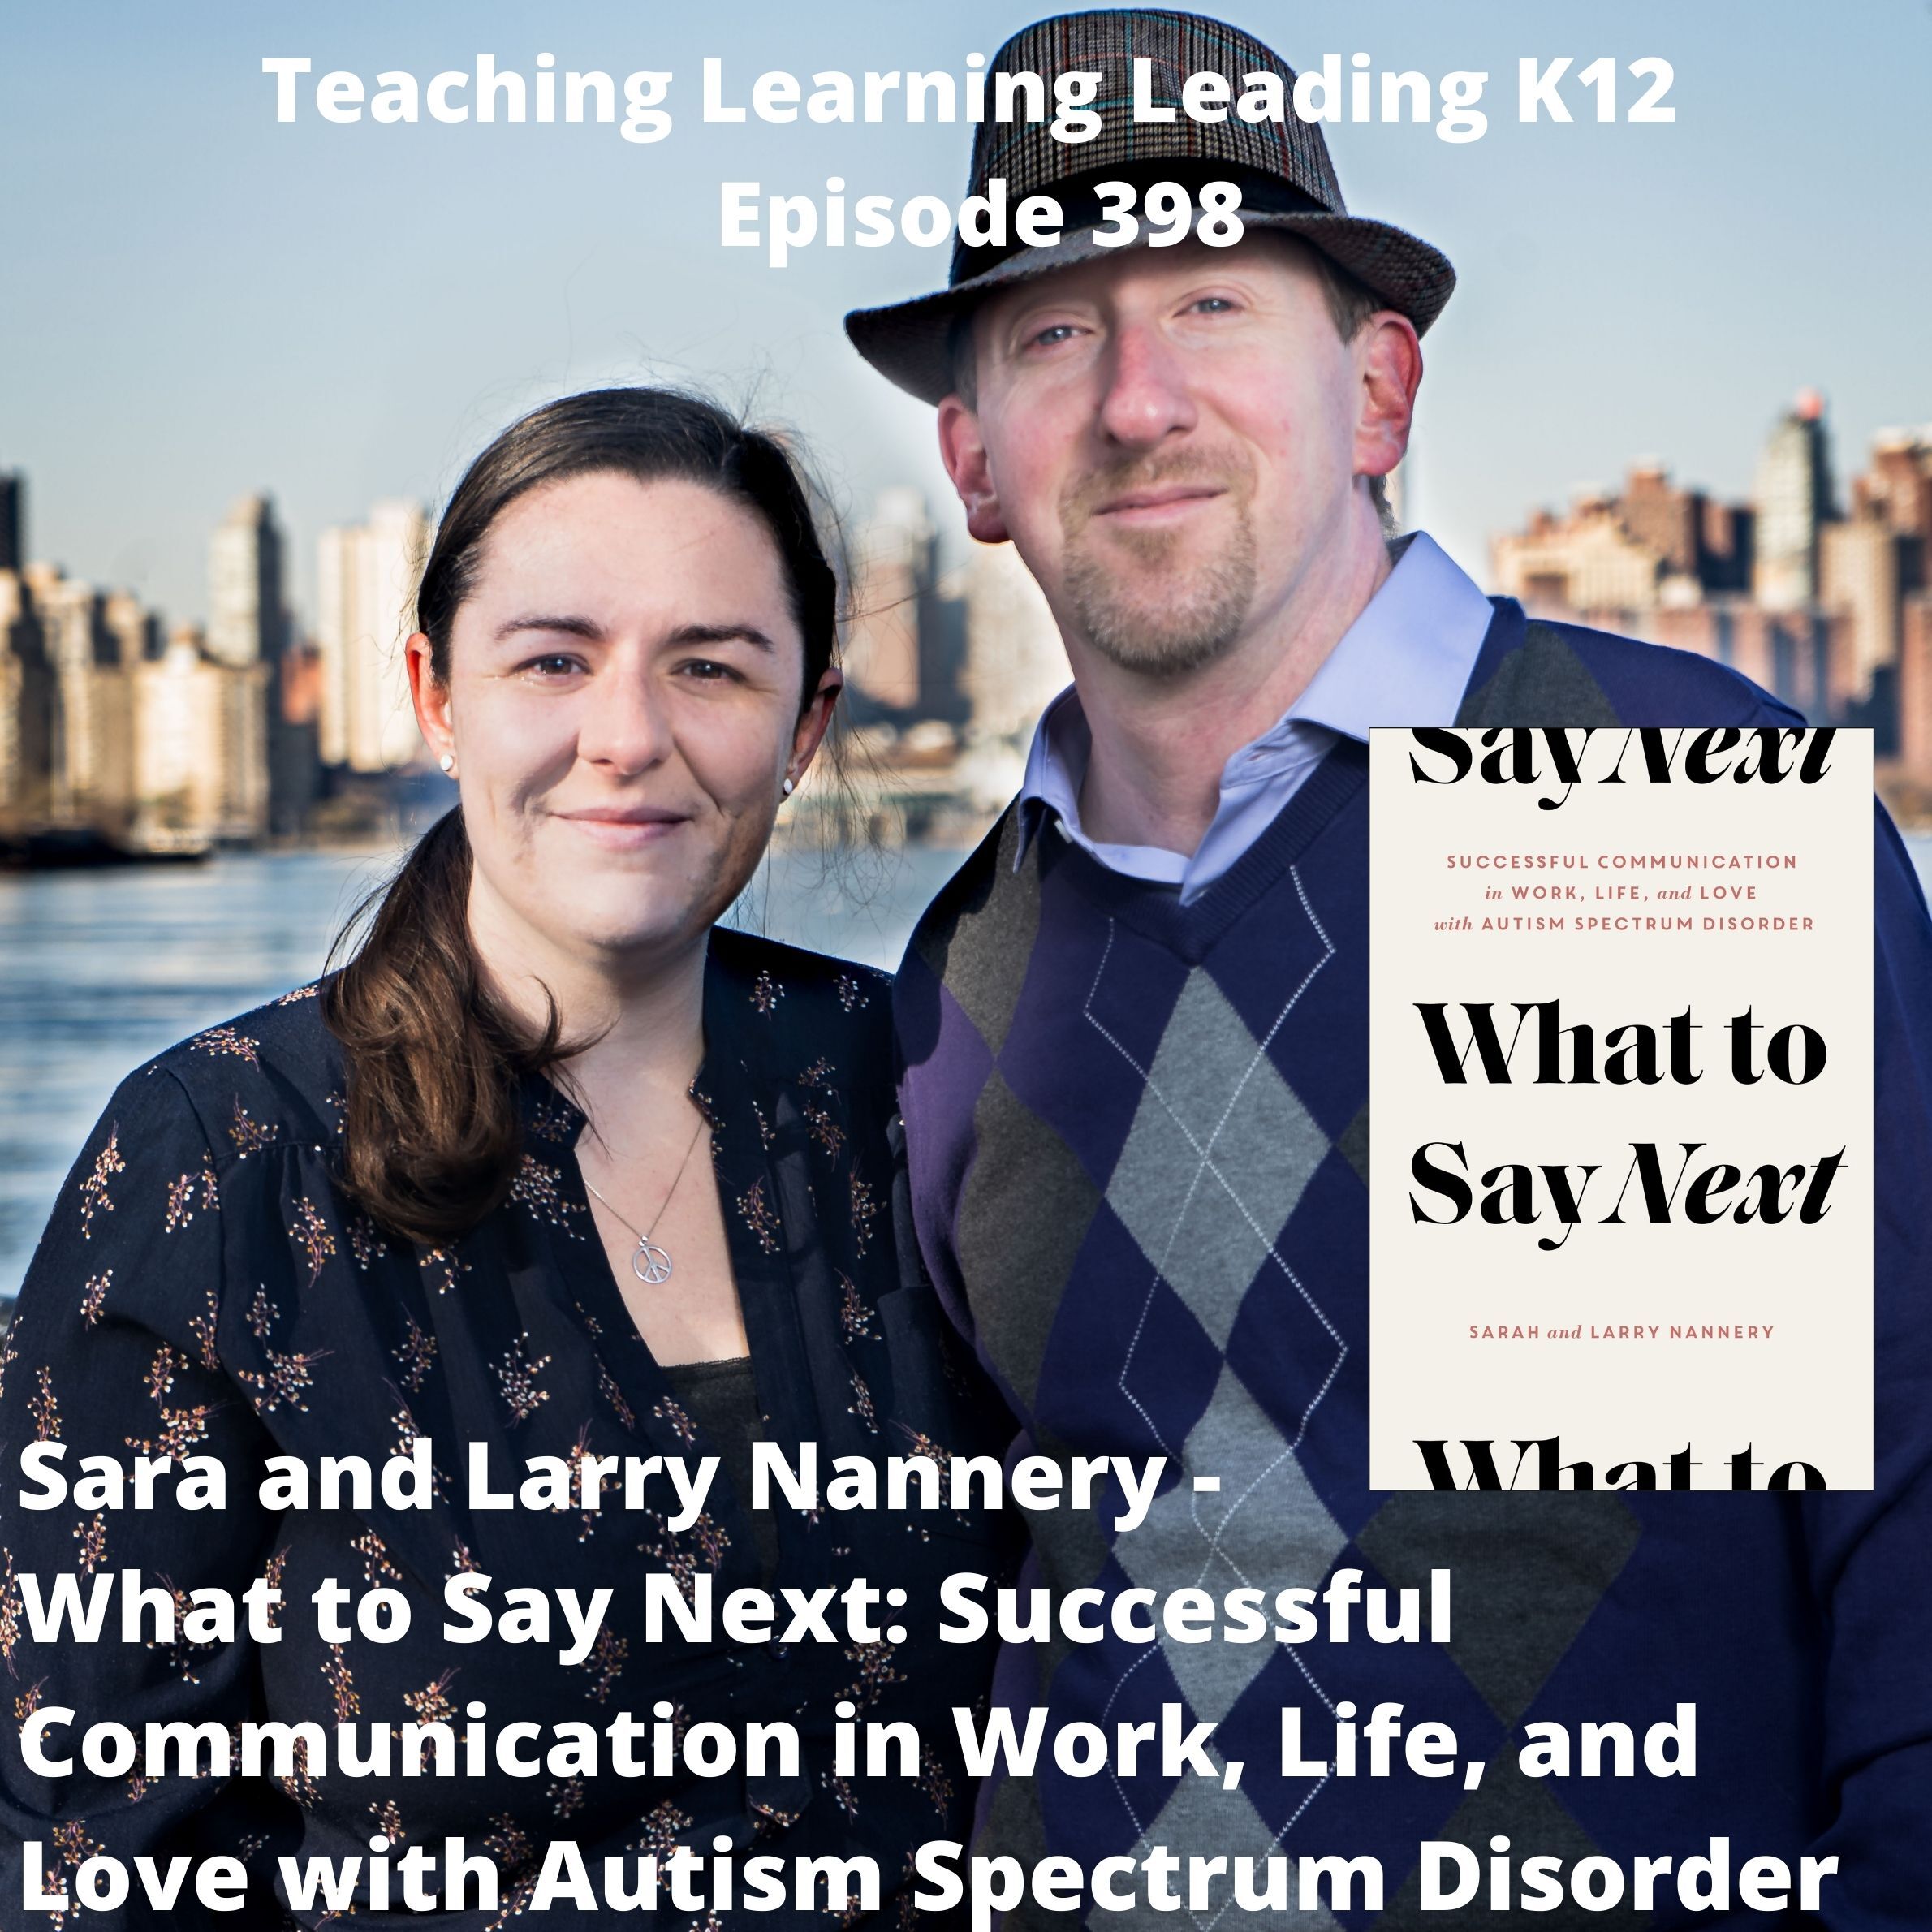 Sara and Larry Nannery - What to Say Next: Successful Communication in Work, Life, and Love with Autism Spectrum Disorder - 398 Image